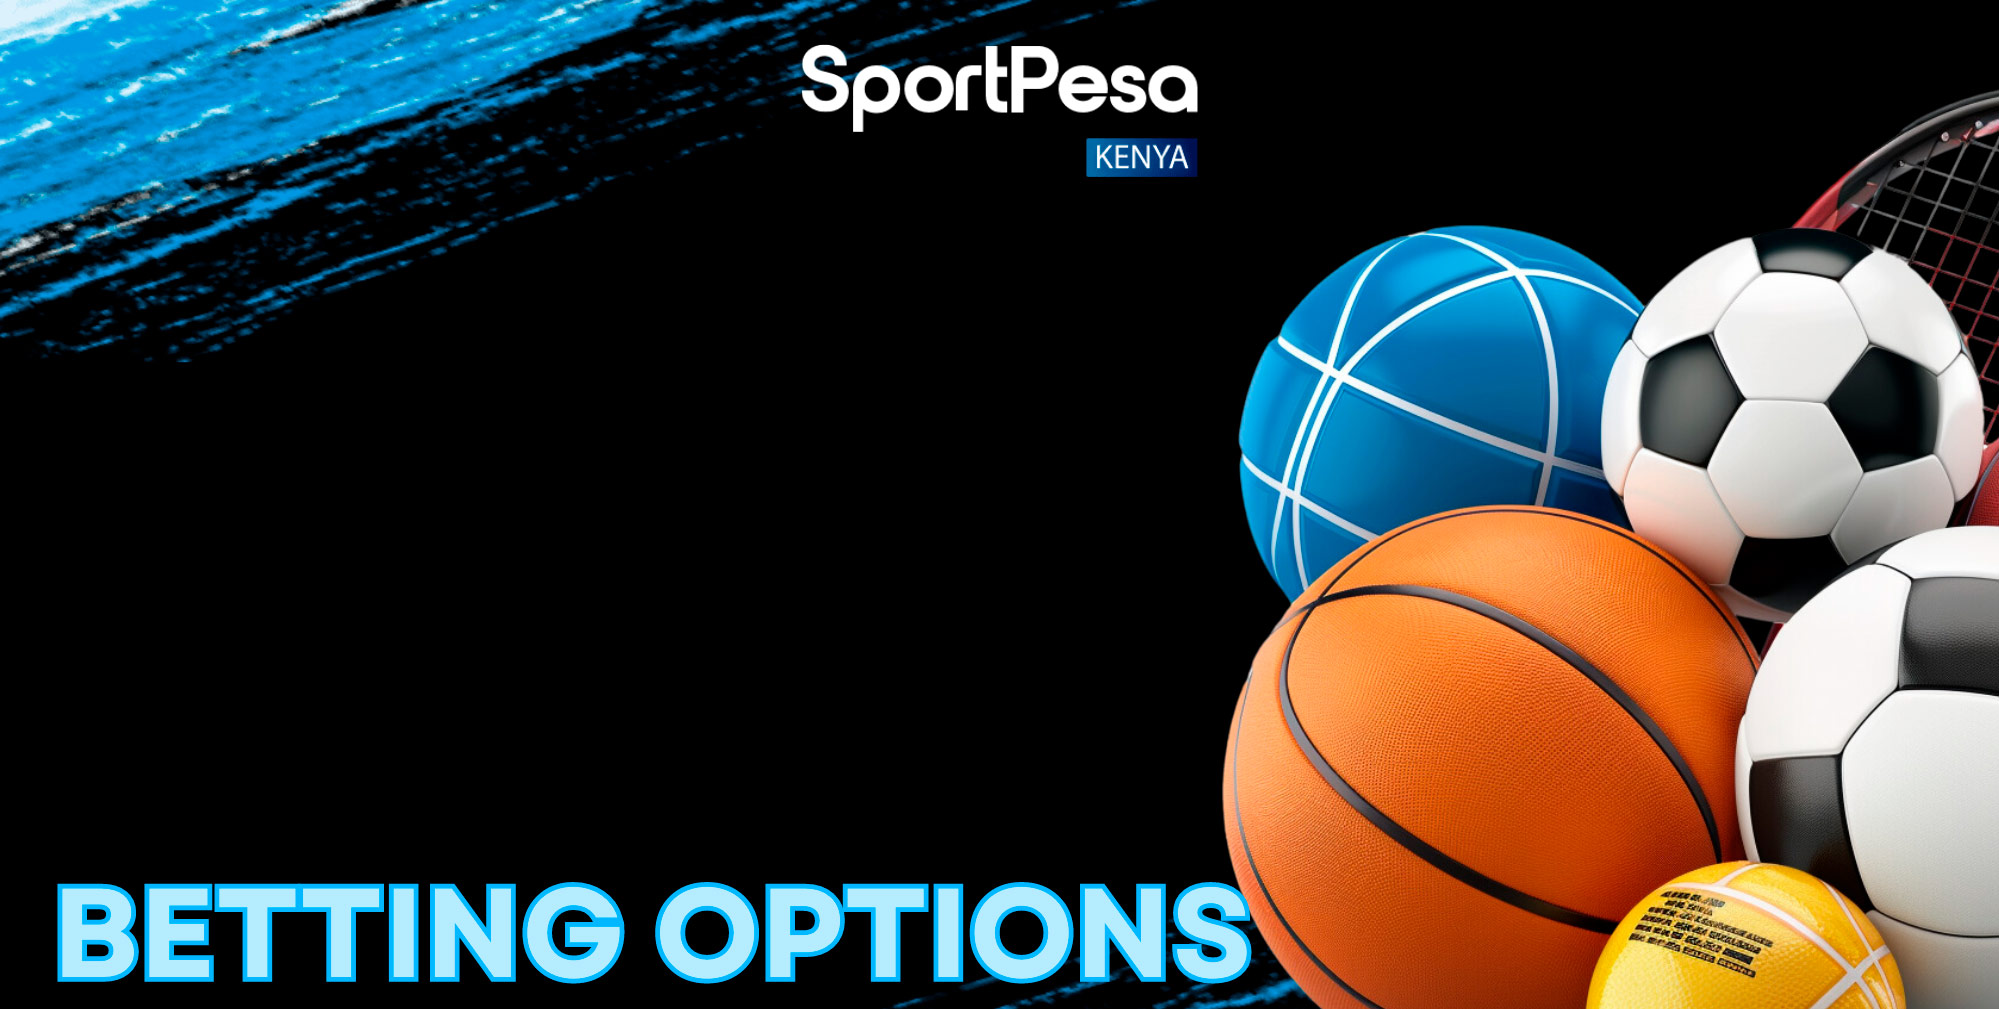 The Sportpesa betting app offers users a variety of sports betting options